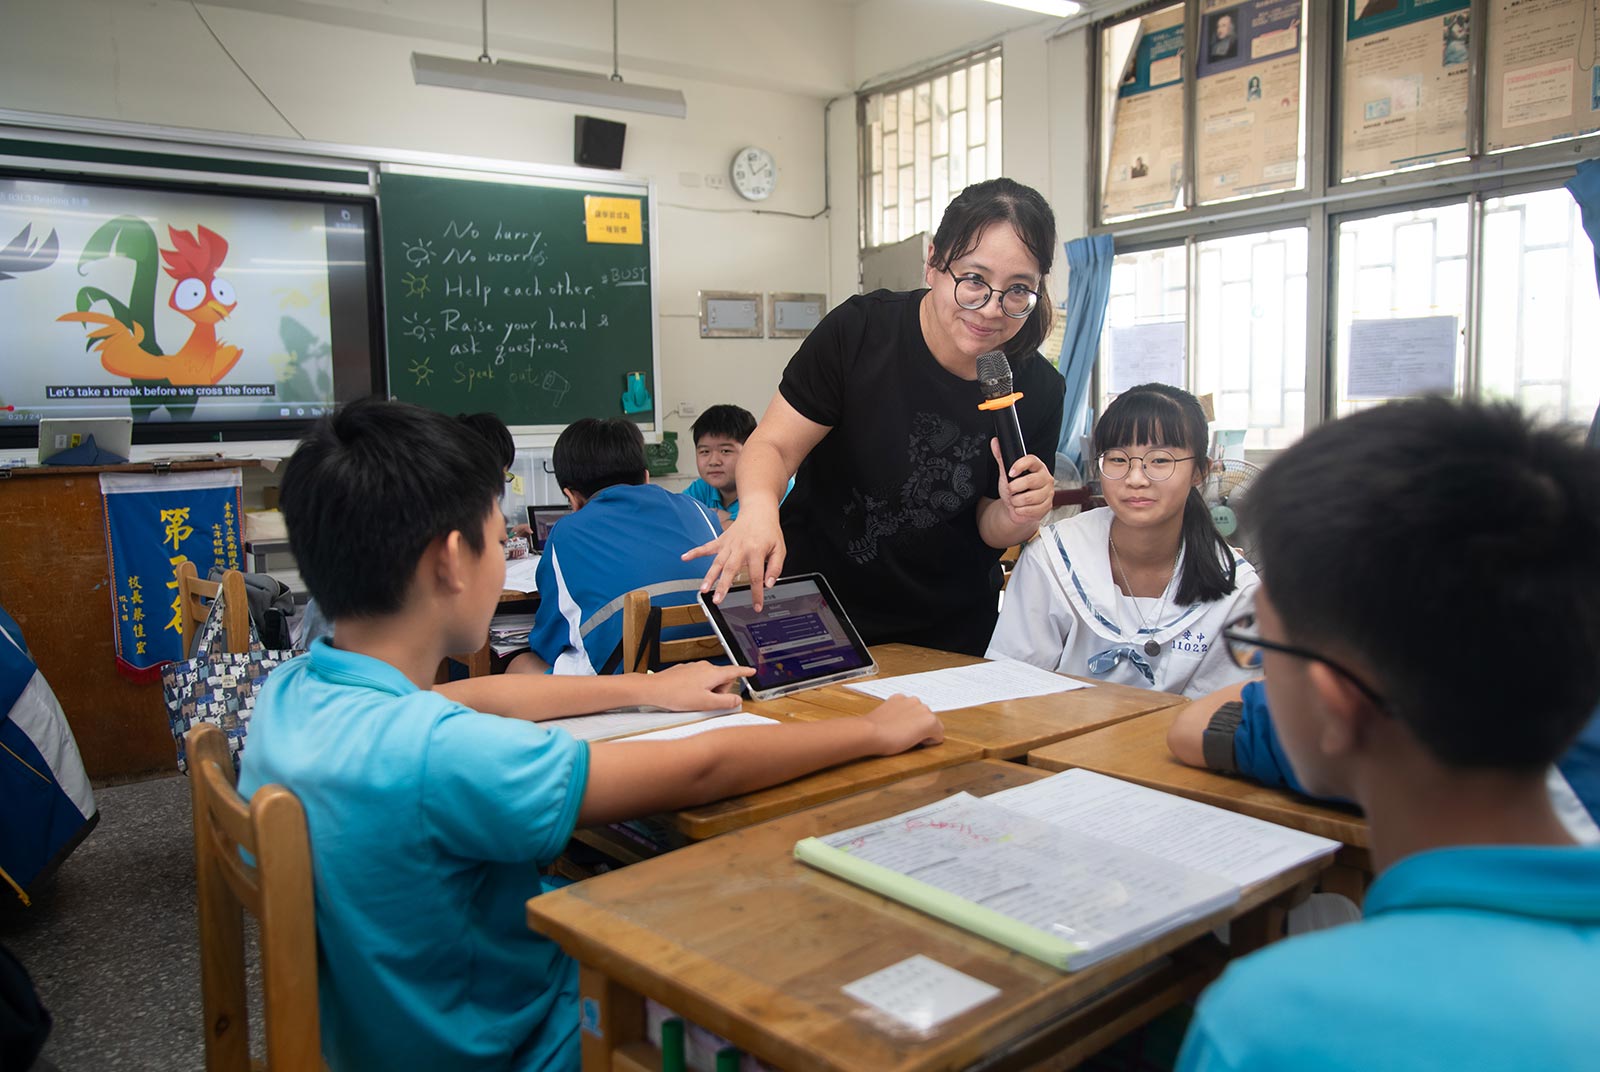 Taiwan's PISA scores are impressive. But is its education system international?